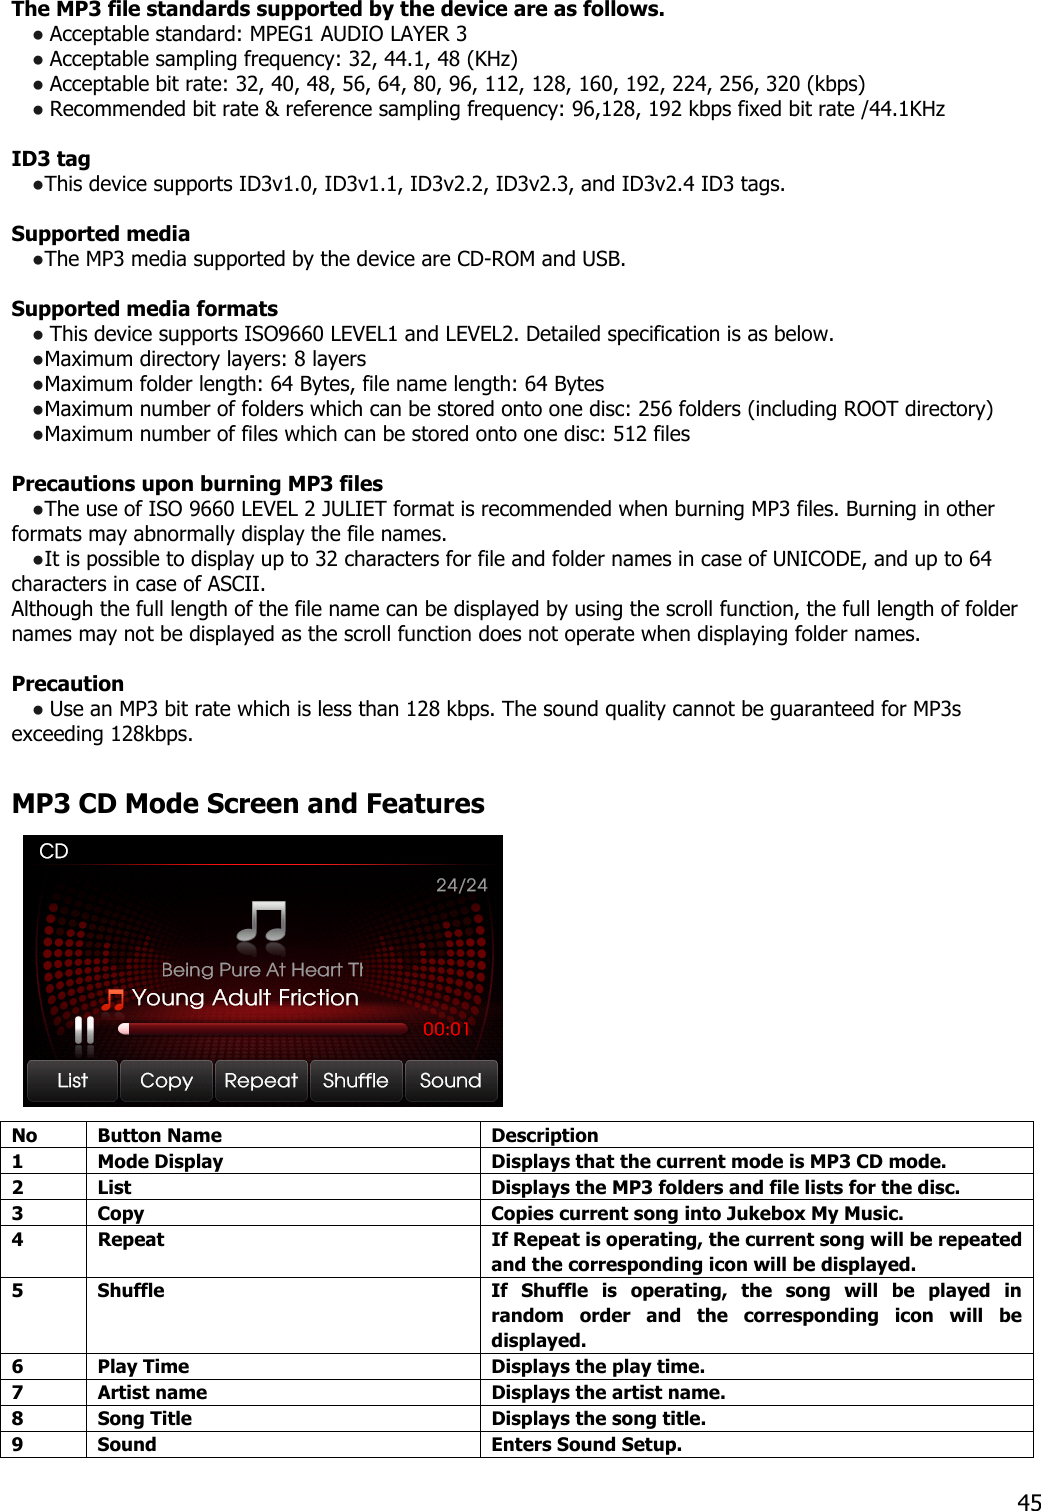 The MP3 file standards supported by the device are as follows. ● Acceptable standard: MPEG1 AUDIO LAYER 3 ● Acceptable sampling frequency: 32, 44.1, 48 (KHz) ● Acceptable bit rate: 32, 40, 48, 56, 64, 80, 96, 112, 128, 160, 192, 224, 256, 320 (kbps) ● Recommended bit rate &amp; reference sampling frequency: 96,128, 192 kbps fixed bit rate /44.1KHz  ID3 tag ●This device supports ID3v1.0, ID3v1.1, ID3v2.2, ID3v2.3, and ID3v2.4 ID3 tags.  Supported media   ●The MP3 media supported by the device are CD-ROM and USB.  Supported media formats ● This device supports ISO9660 LEVEL1 and LEVEL2. Detailed specification is as below. ●Maximum directory layers: 8 layers ●Maximum folder length: 64 Bytes, file name length: 64 Bytes ●Maximum number of folders which can be stored onto one disc: 256 folders (including ROOT directory) ●Maximum number of files which can be stored onto one disc: 512 files  Precautions upon burning MP3 files   ●The use of ISO 9660 LEVEL 2 JULIET format is recommended when burning MP3 files. Burning in other formats may abnormally display the file names. ●It is possible to display up to 32 characters for file and folder names in case of UNICODE, and up to 64 characters in case of ASCII. Although the full length of the file name can be displayed by using the scroll function, the full length of folder names may not be displayed as the scroll function does not operate when displaying folder names.    Precaution ● Use an MP3 bit rate which is less than 128 kbps. The sound quality cannot be guaranteed for MP3s exceeding 128kbps.  MP3 CD Mode Screen and Features   No Button Name  Description 1  Mode Display  Displays that the current mode is MP3 CD mode. 2  List  Displays the MP3 folders and file lists for the disc. 3  Copy  Copies current song into Jukebox My Music. 4  Repeat  If Repeat is operating, the current song will be repeated and the corresponding icon will be displayed. 5  Shuffle  If Shuffle is operating, the song will be played in random order and the corresponding icon will be displayed. 6  Play Time  Displays the play time. 7  Artist name  Displays the artist name. 8  Song Title  Displays the song title. 9  Sound  Enters Sound Setup.  45